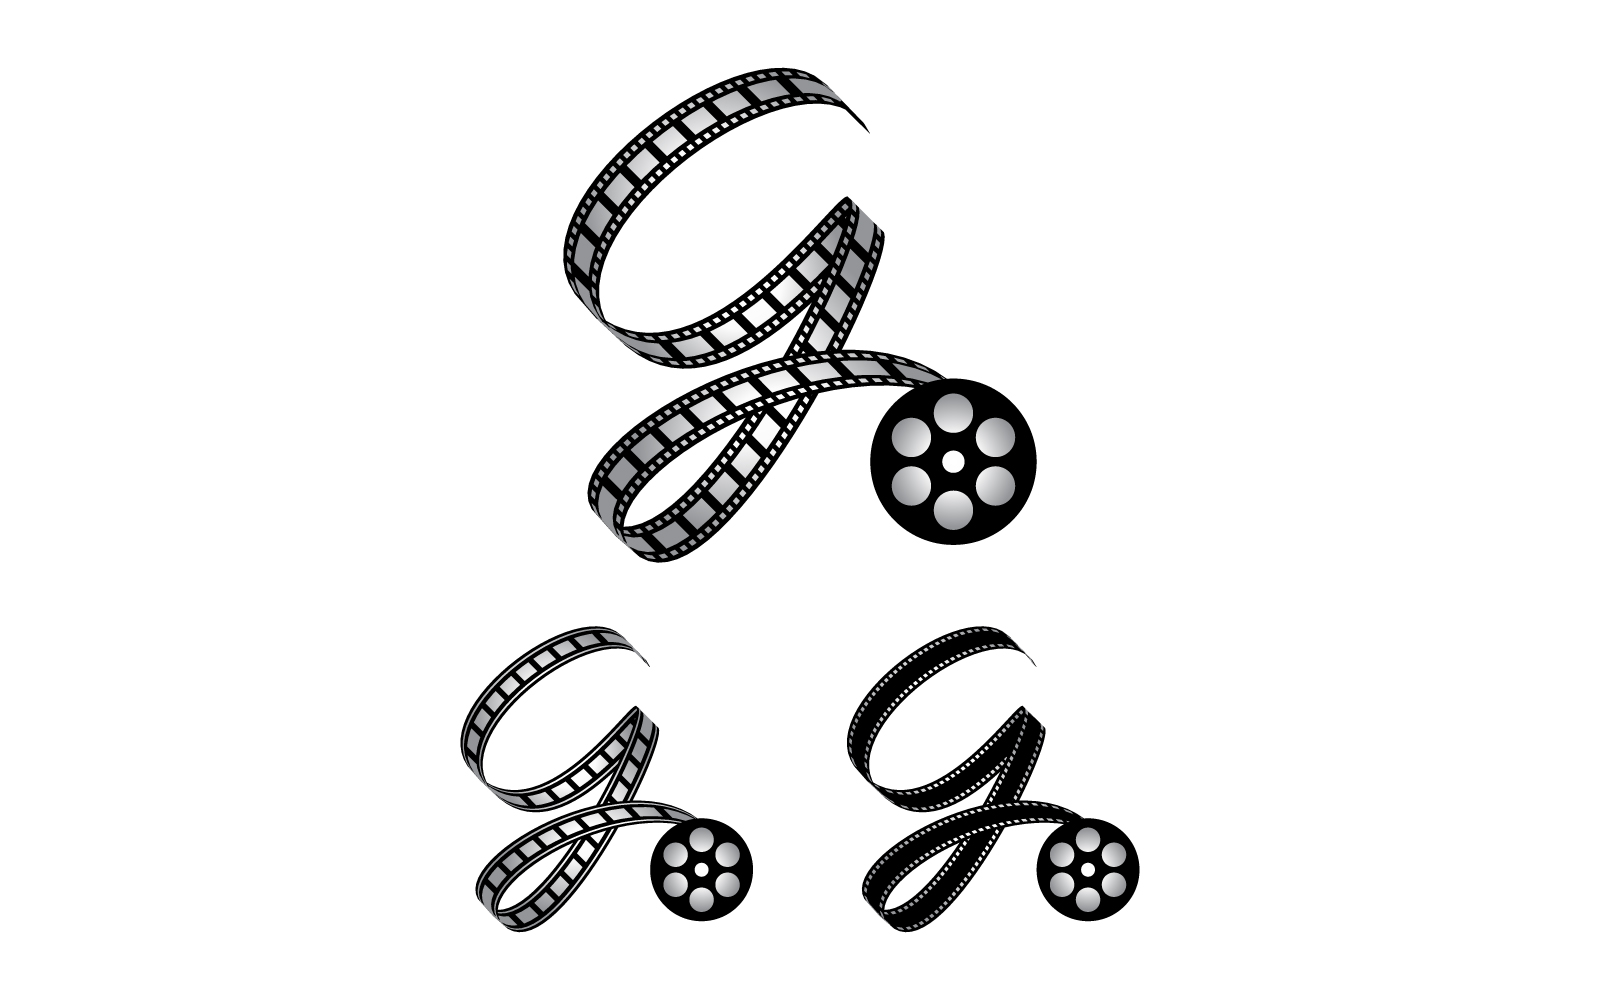 Letter G Made from Film Strip, Logo For Media Photography Videography Youtube Channel Production